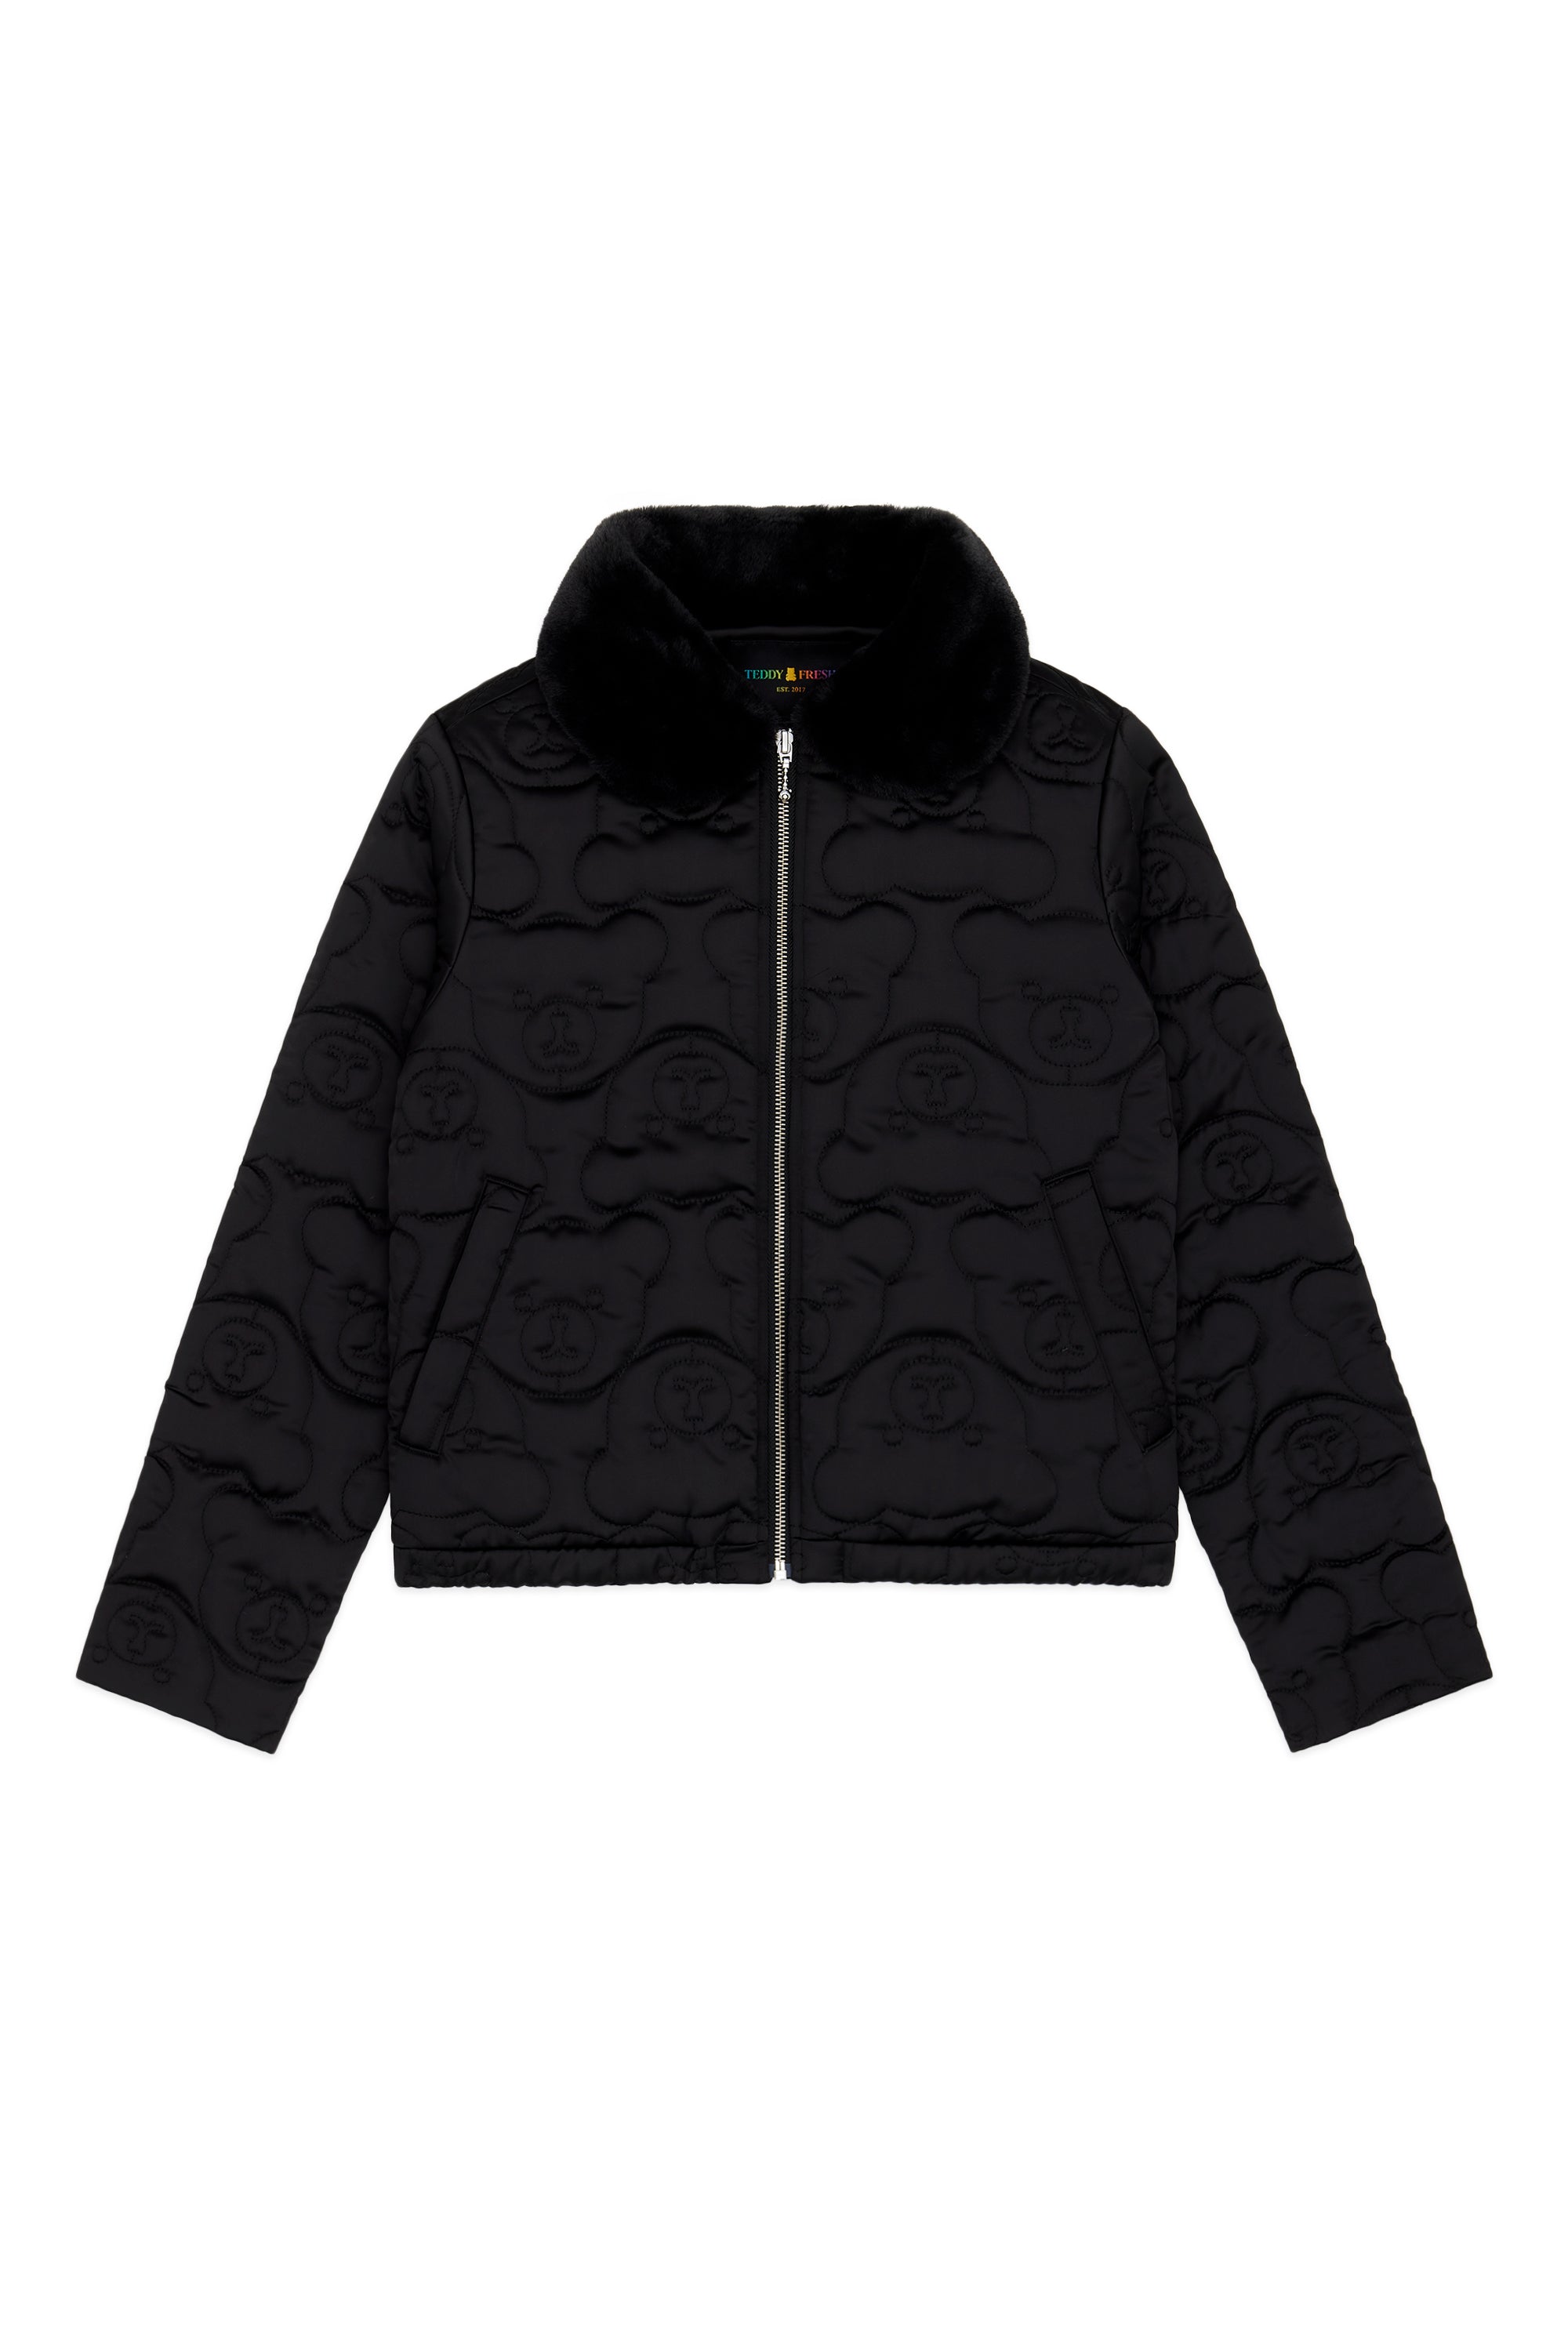 Soft And Fluffy Quilted Zip Coat - Teddy Fresh